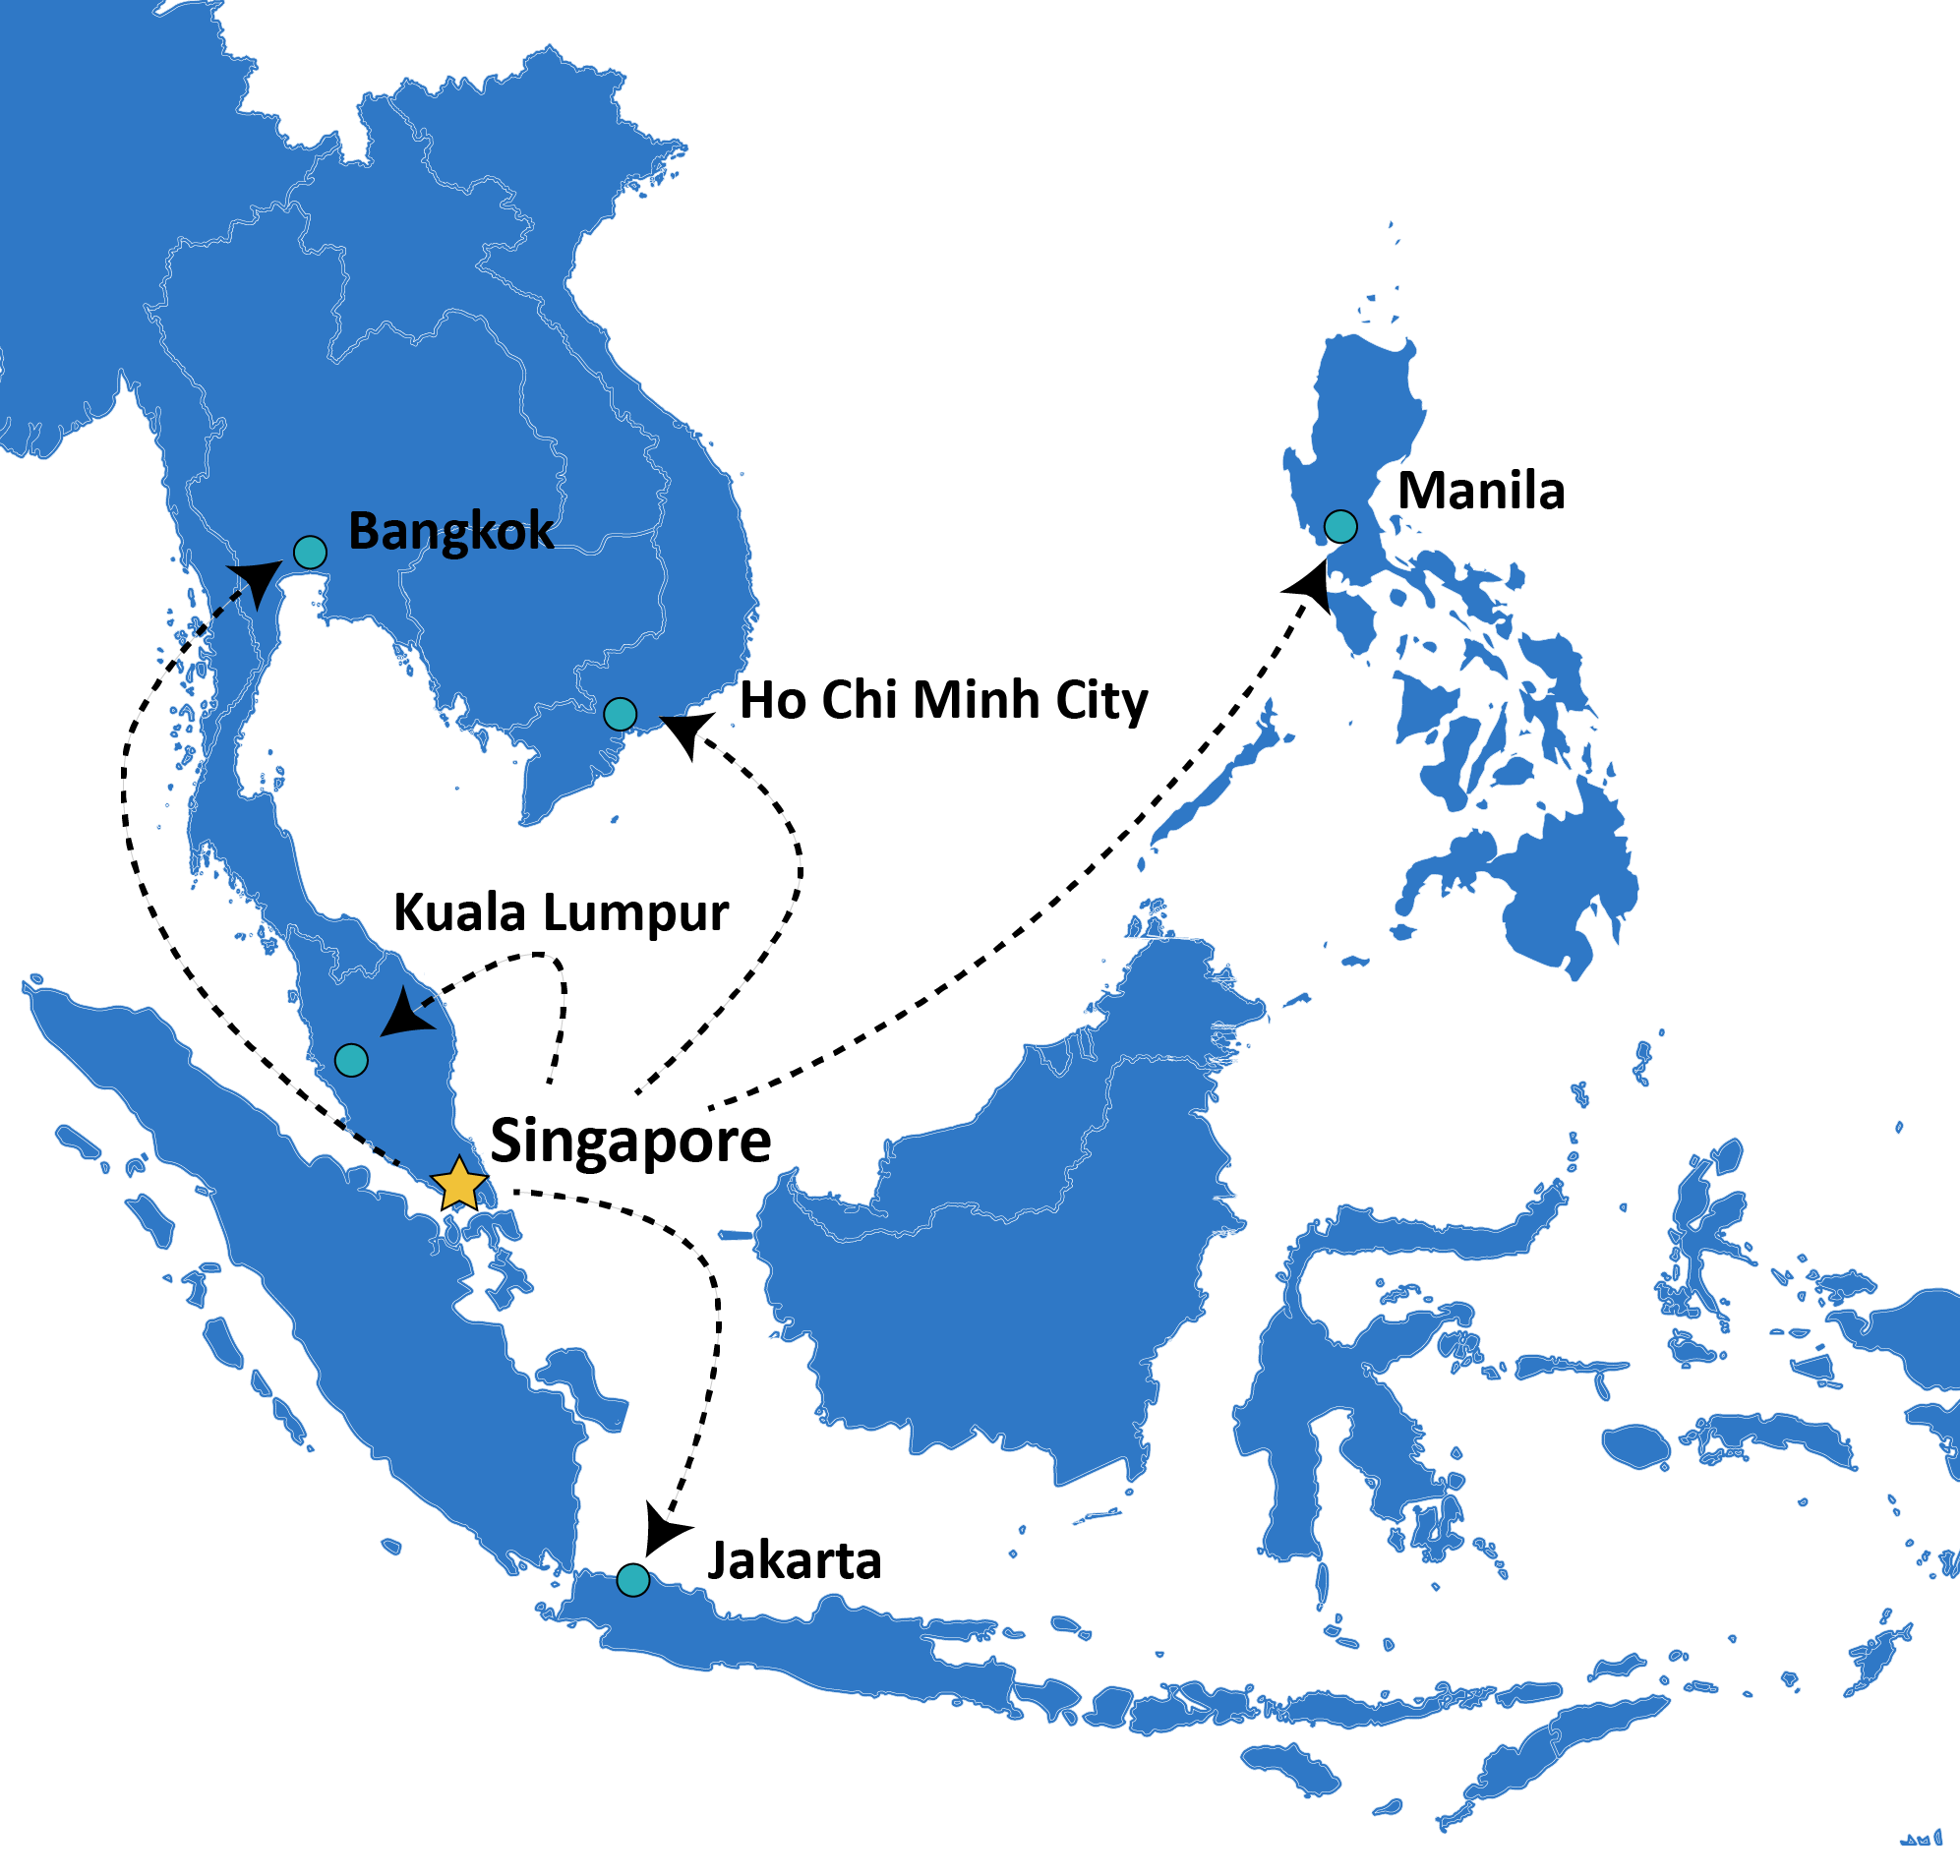 A map of Southeast Asia